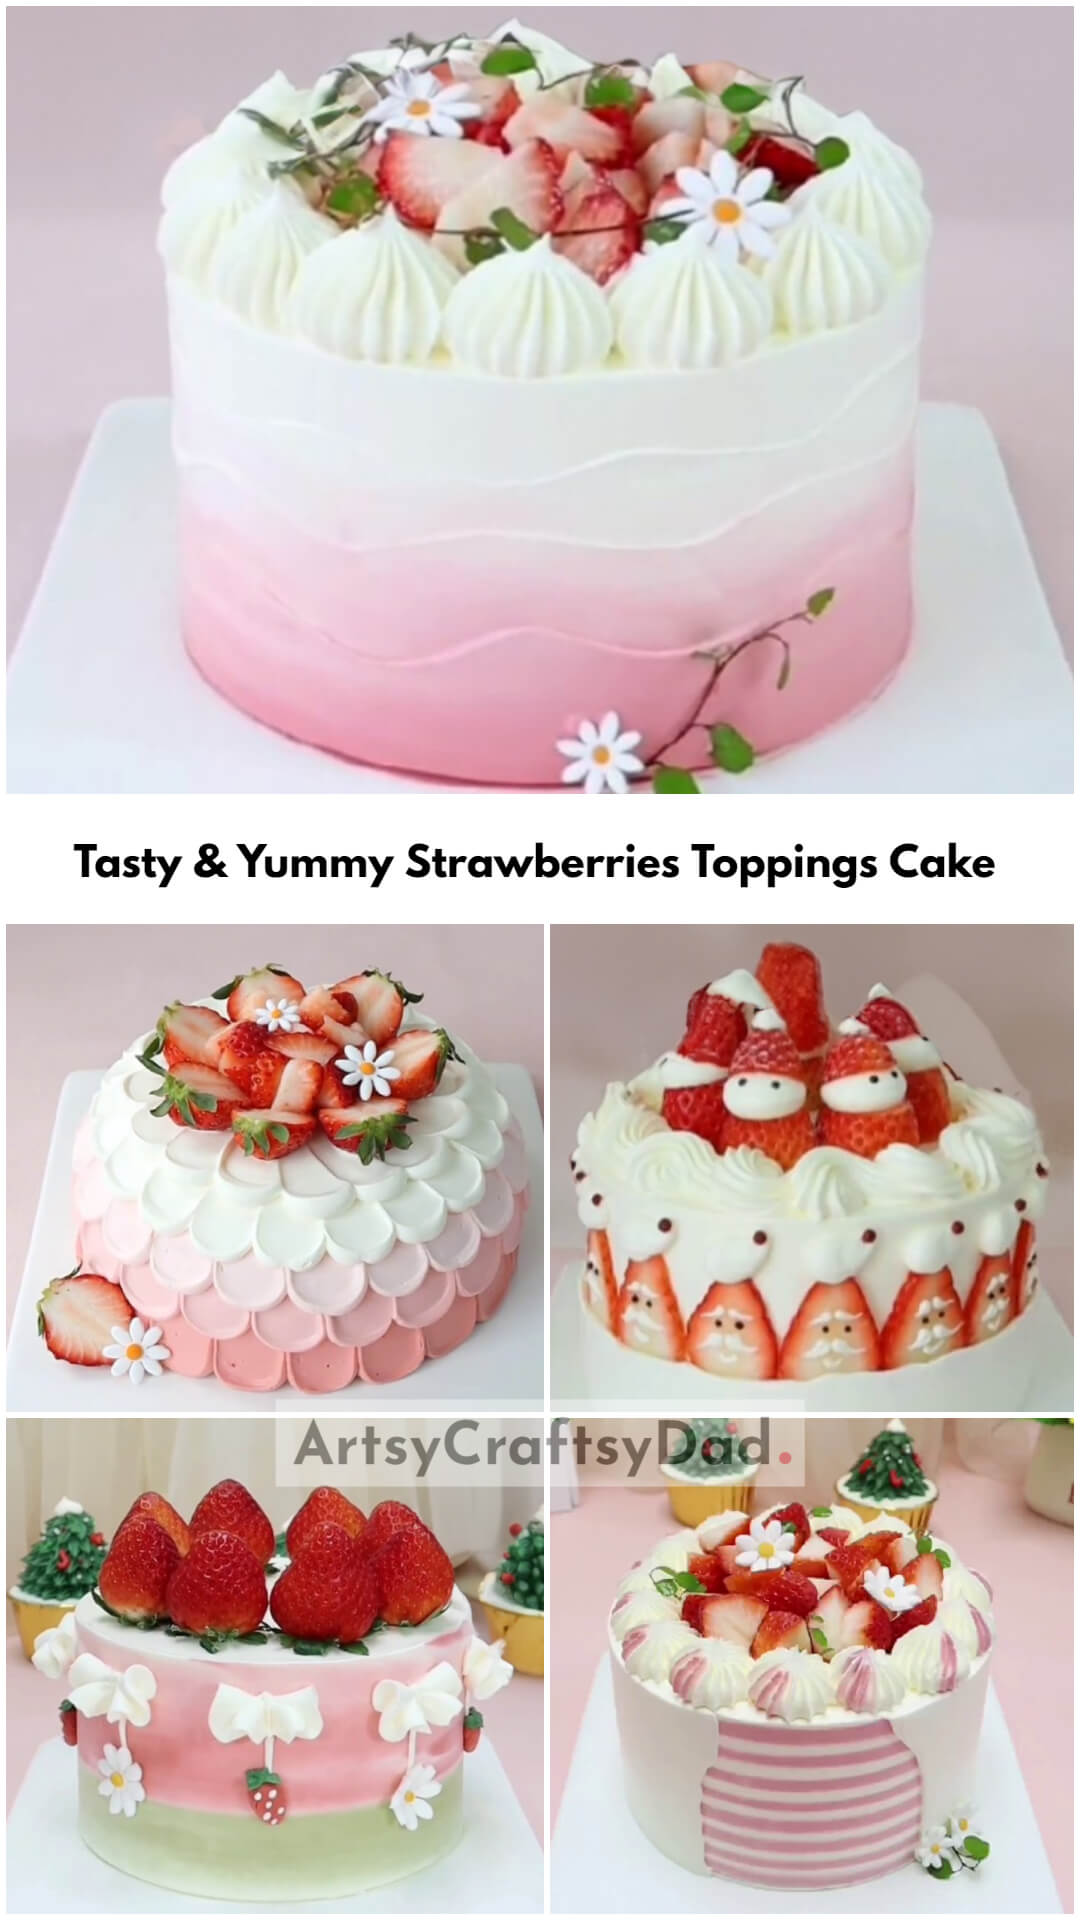 Tasty & Yummy Strawberries Toppings Cake Decoration Ideas